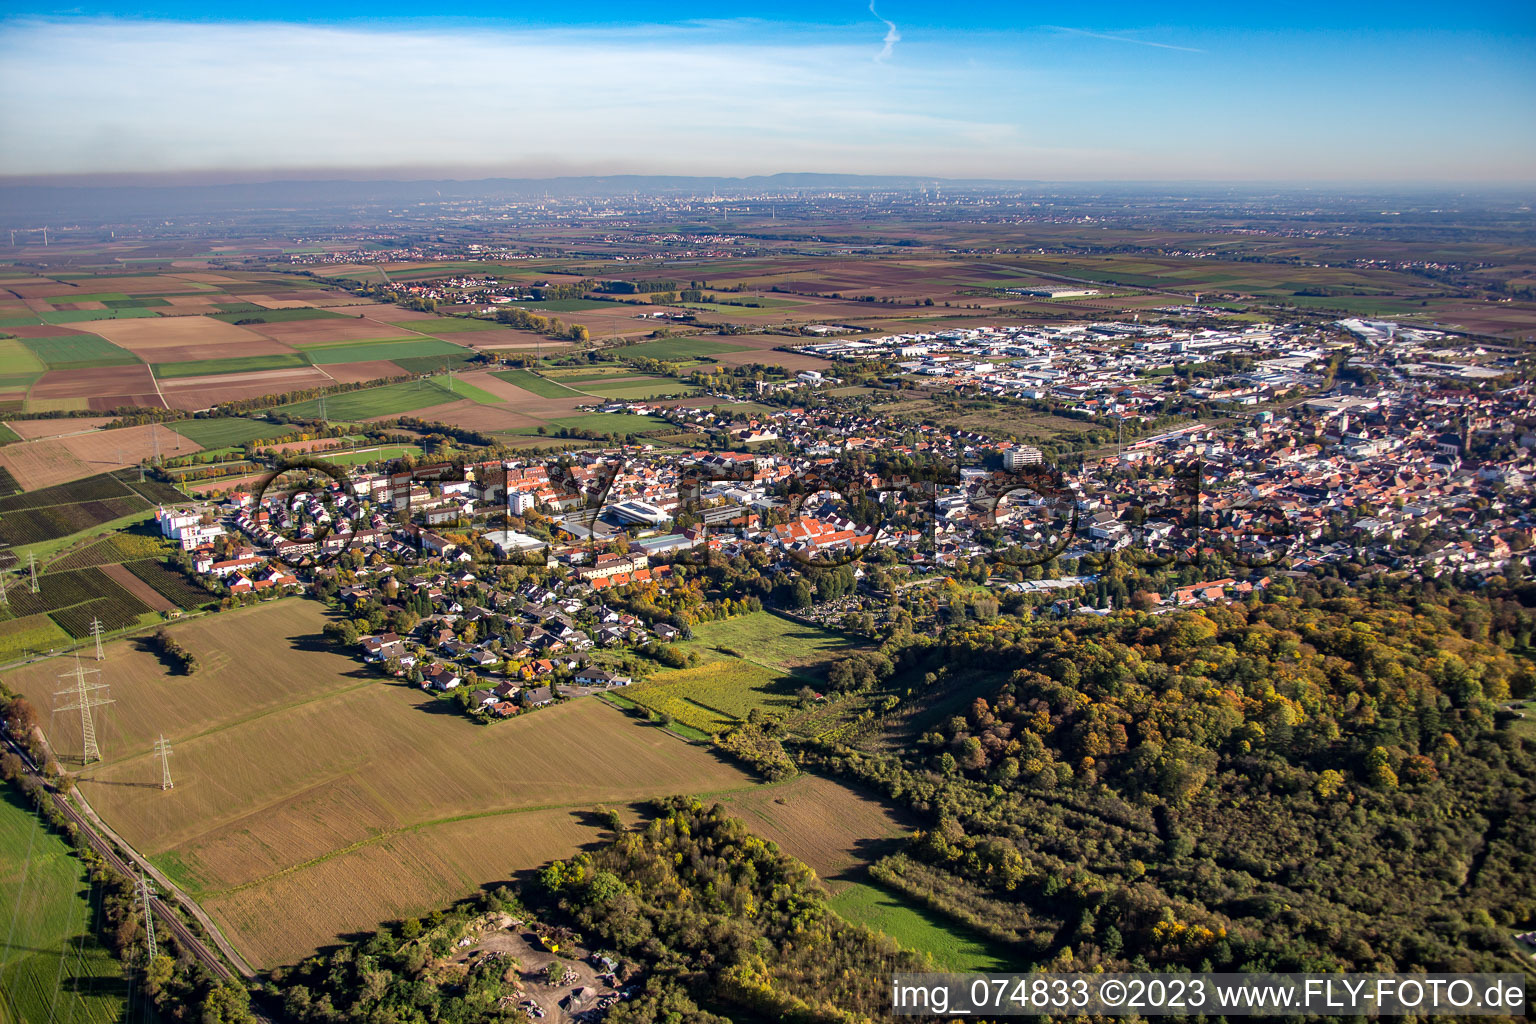 From northwest in Grünstadt in the state Rhineland-Palatinate, Germany